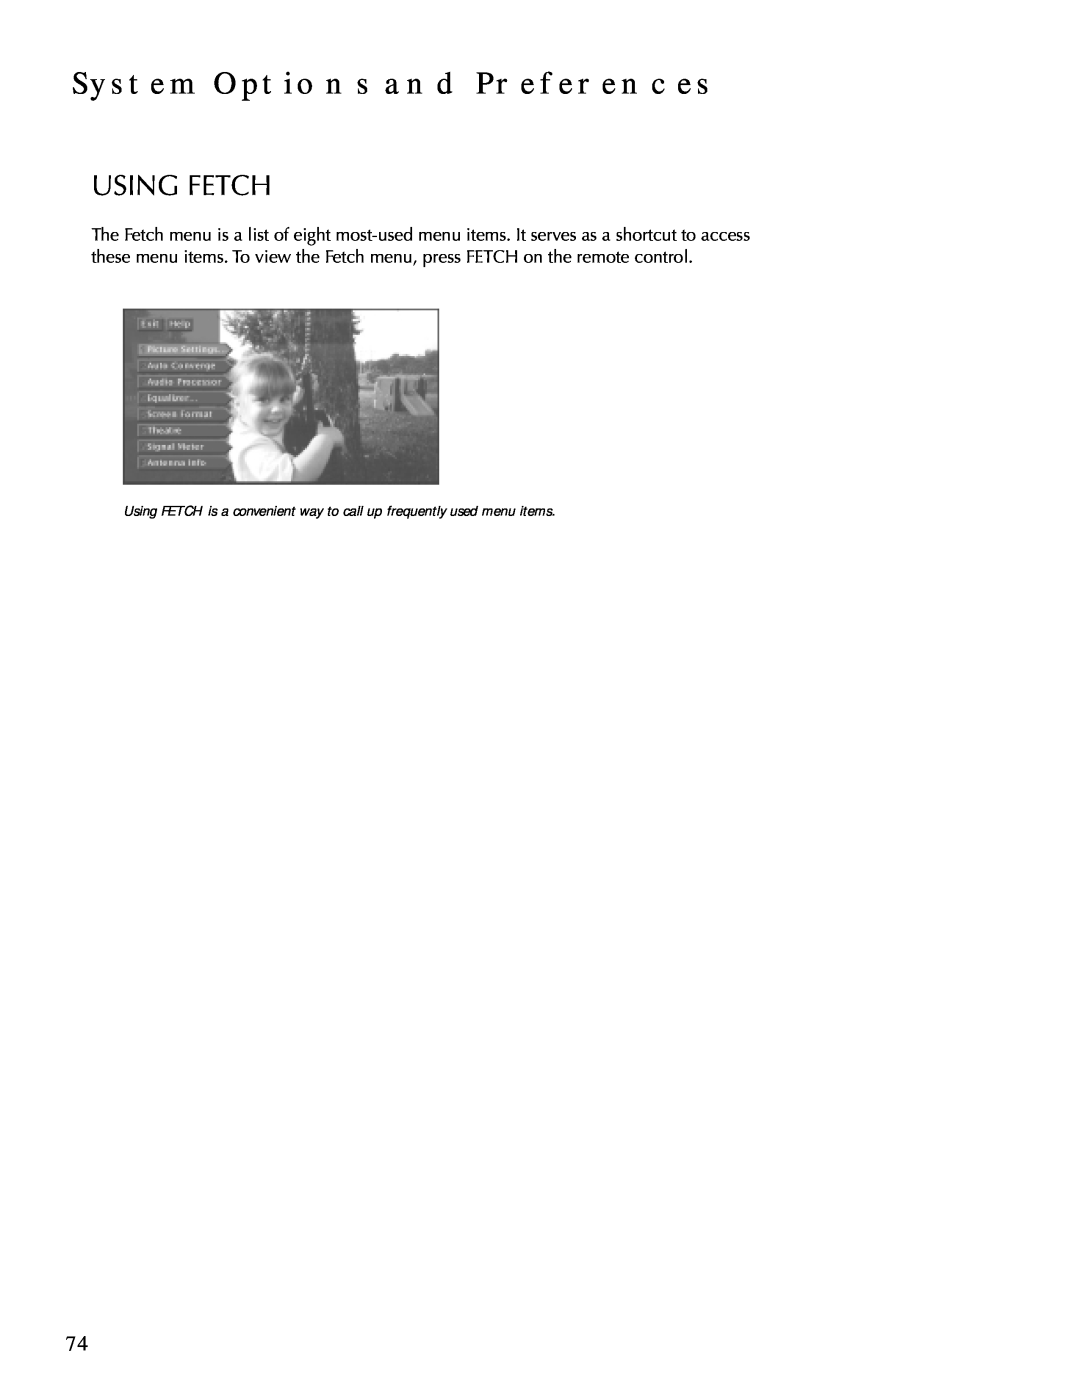 DirecTV HDTV user manual Using Fetch, System Options And Preferences 